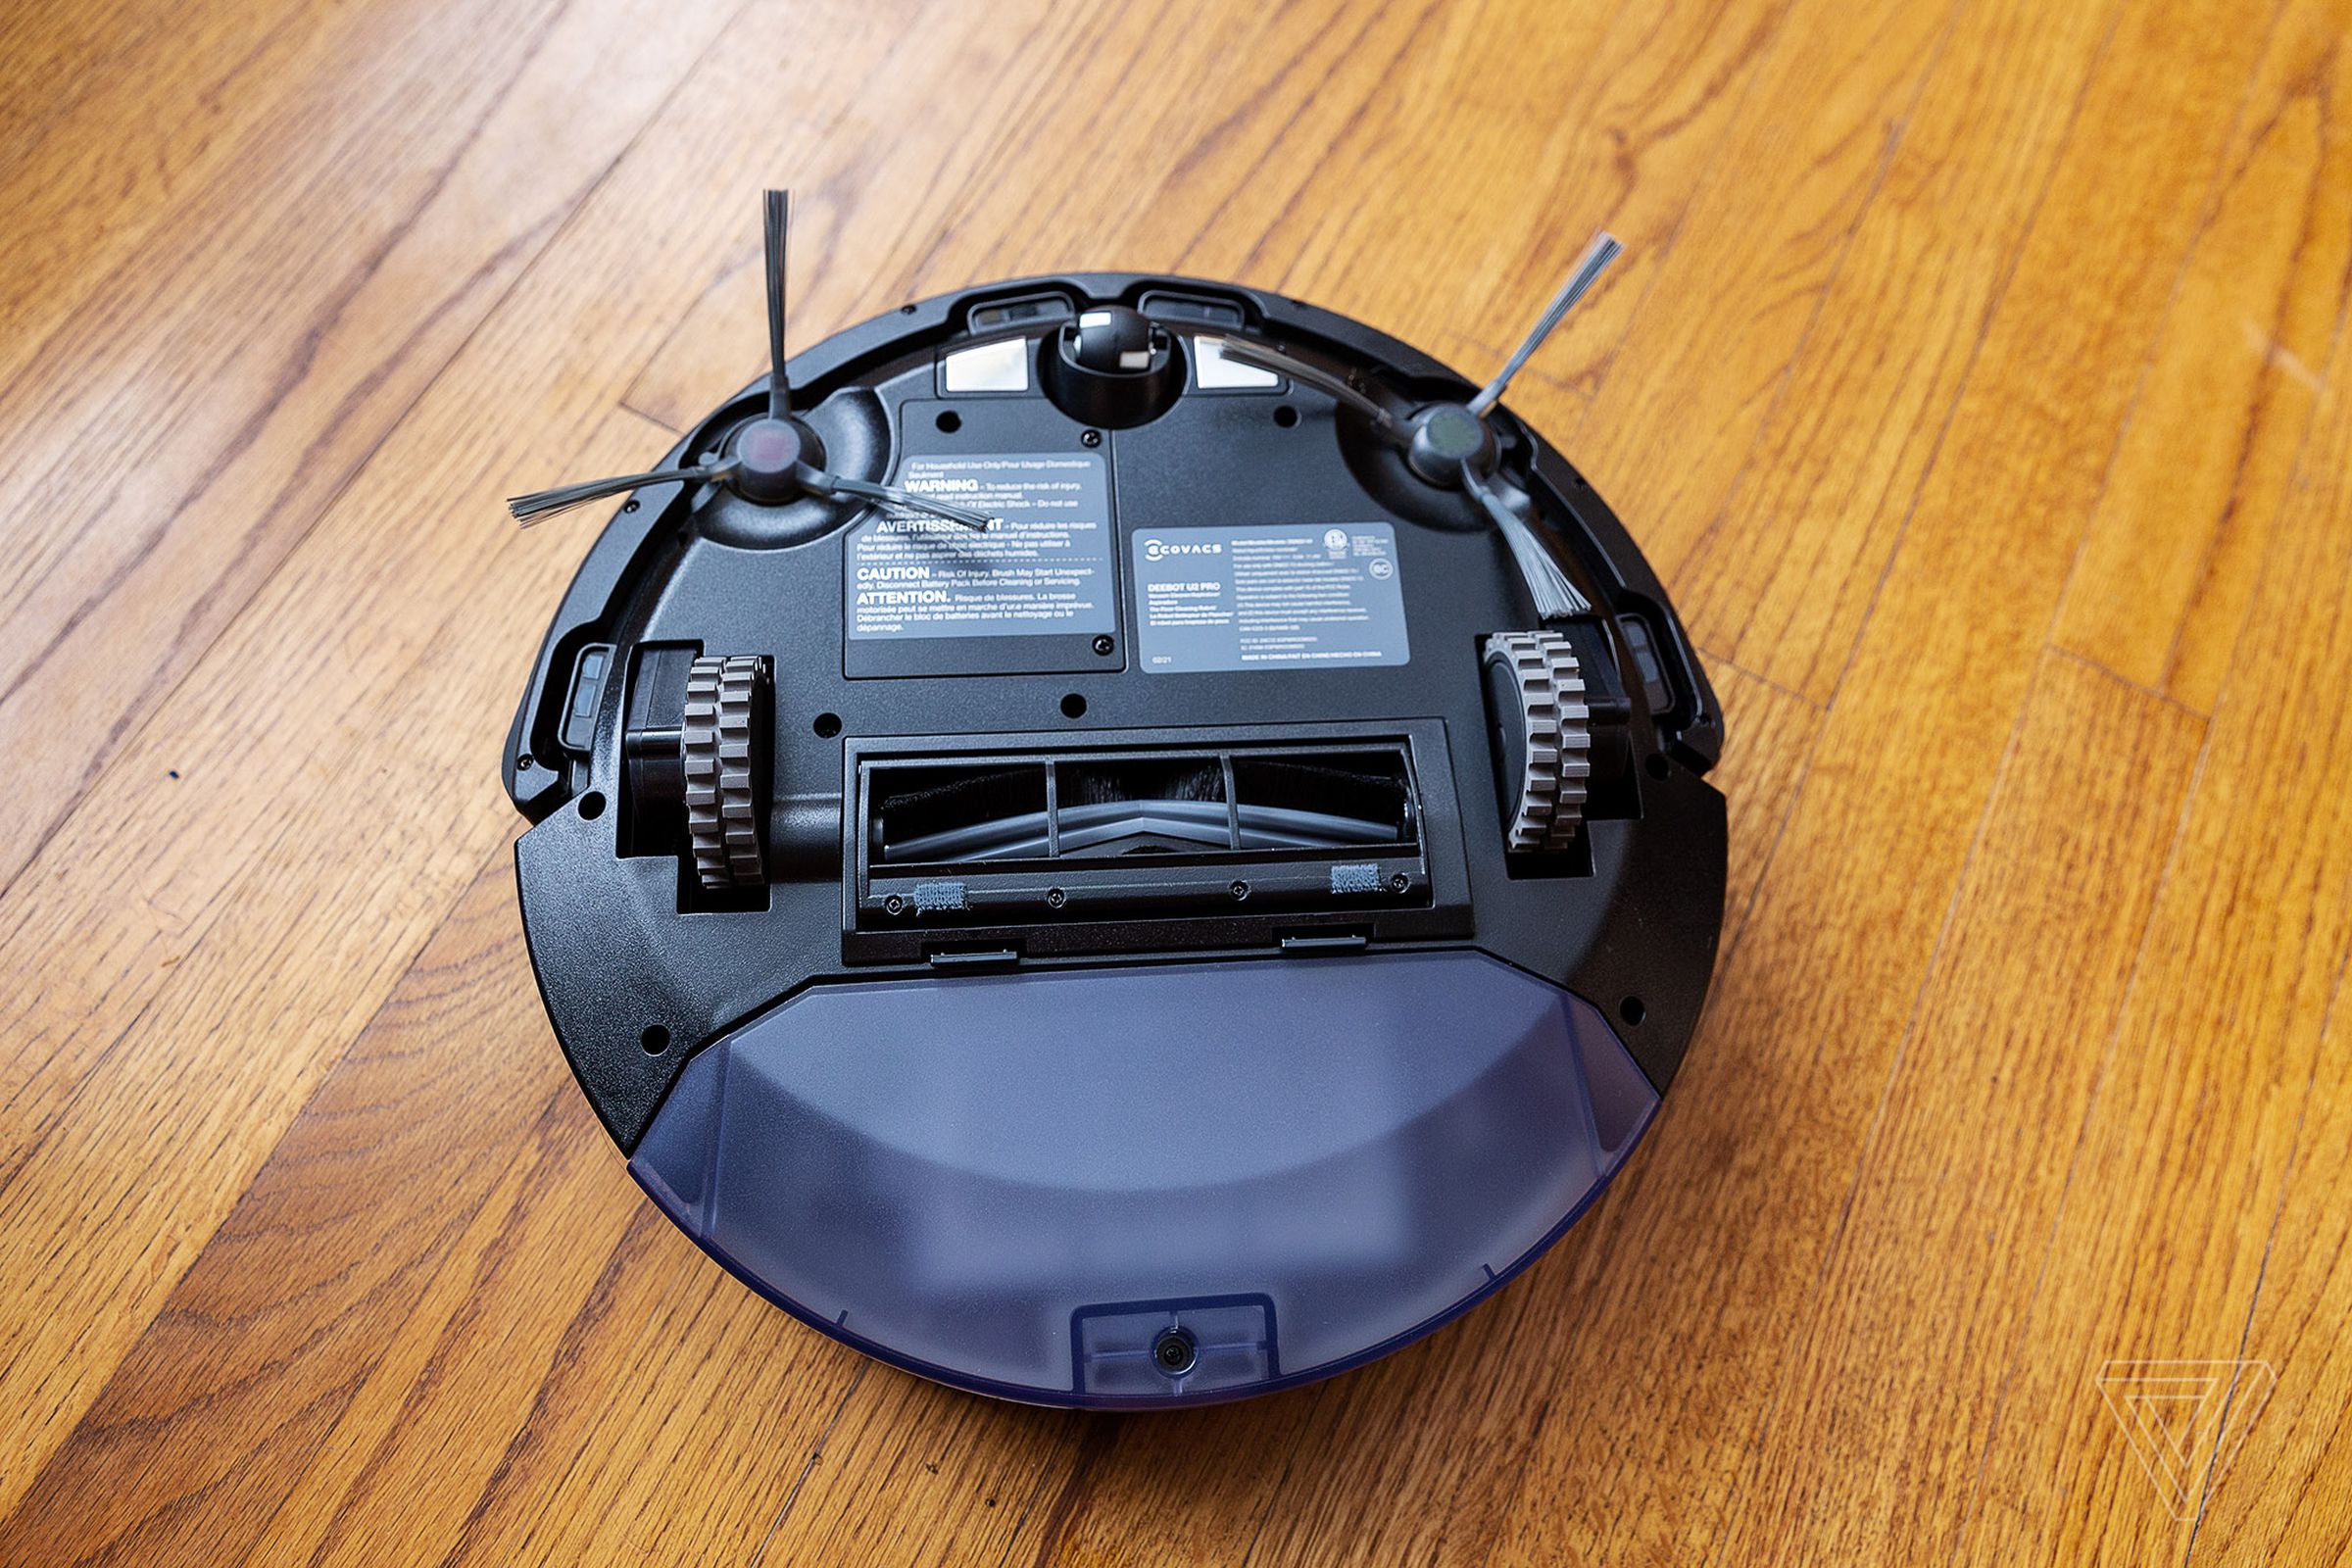 The Deebot U2 uses a bristle / rubber brush or a rubber brush, and has two side brushes.